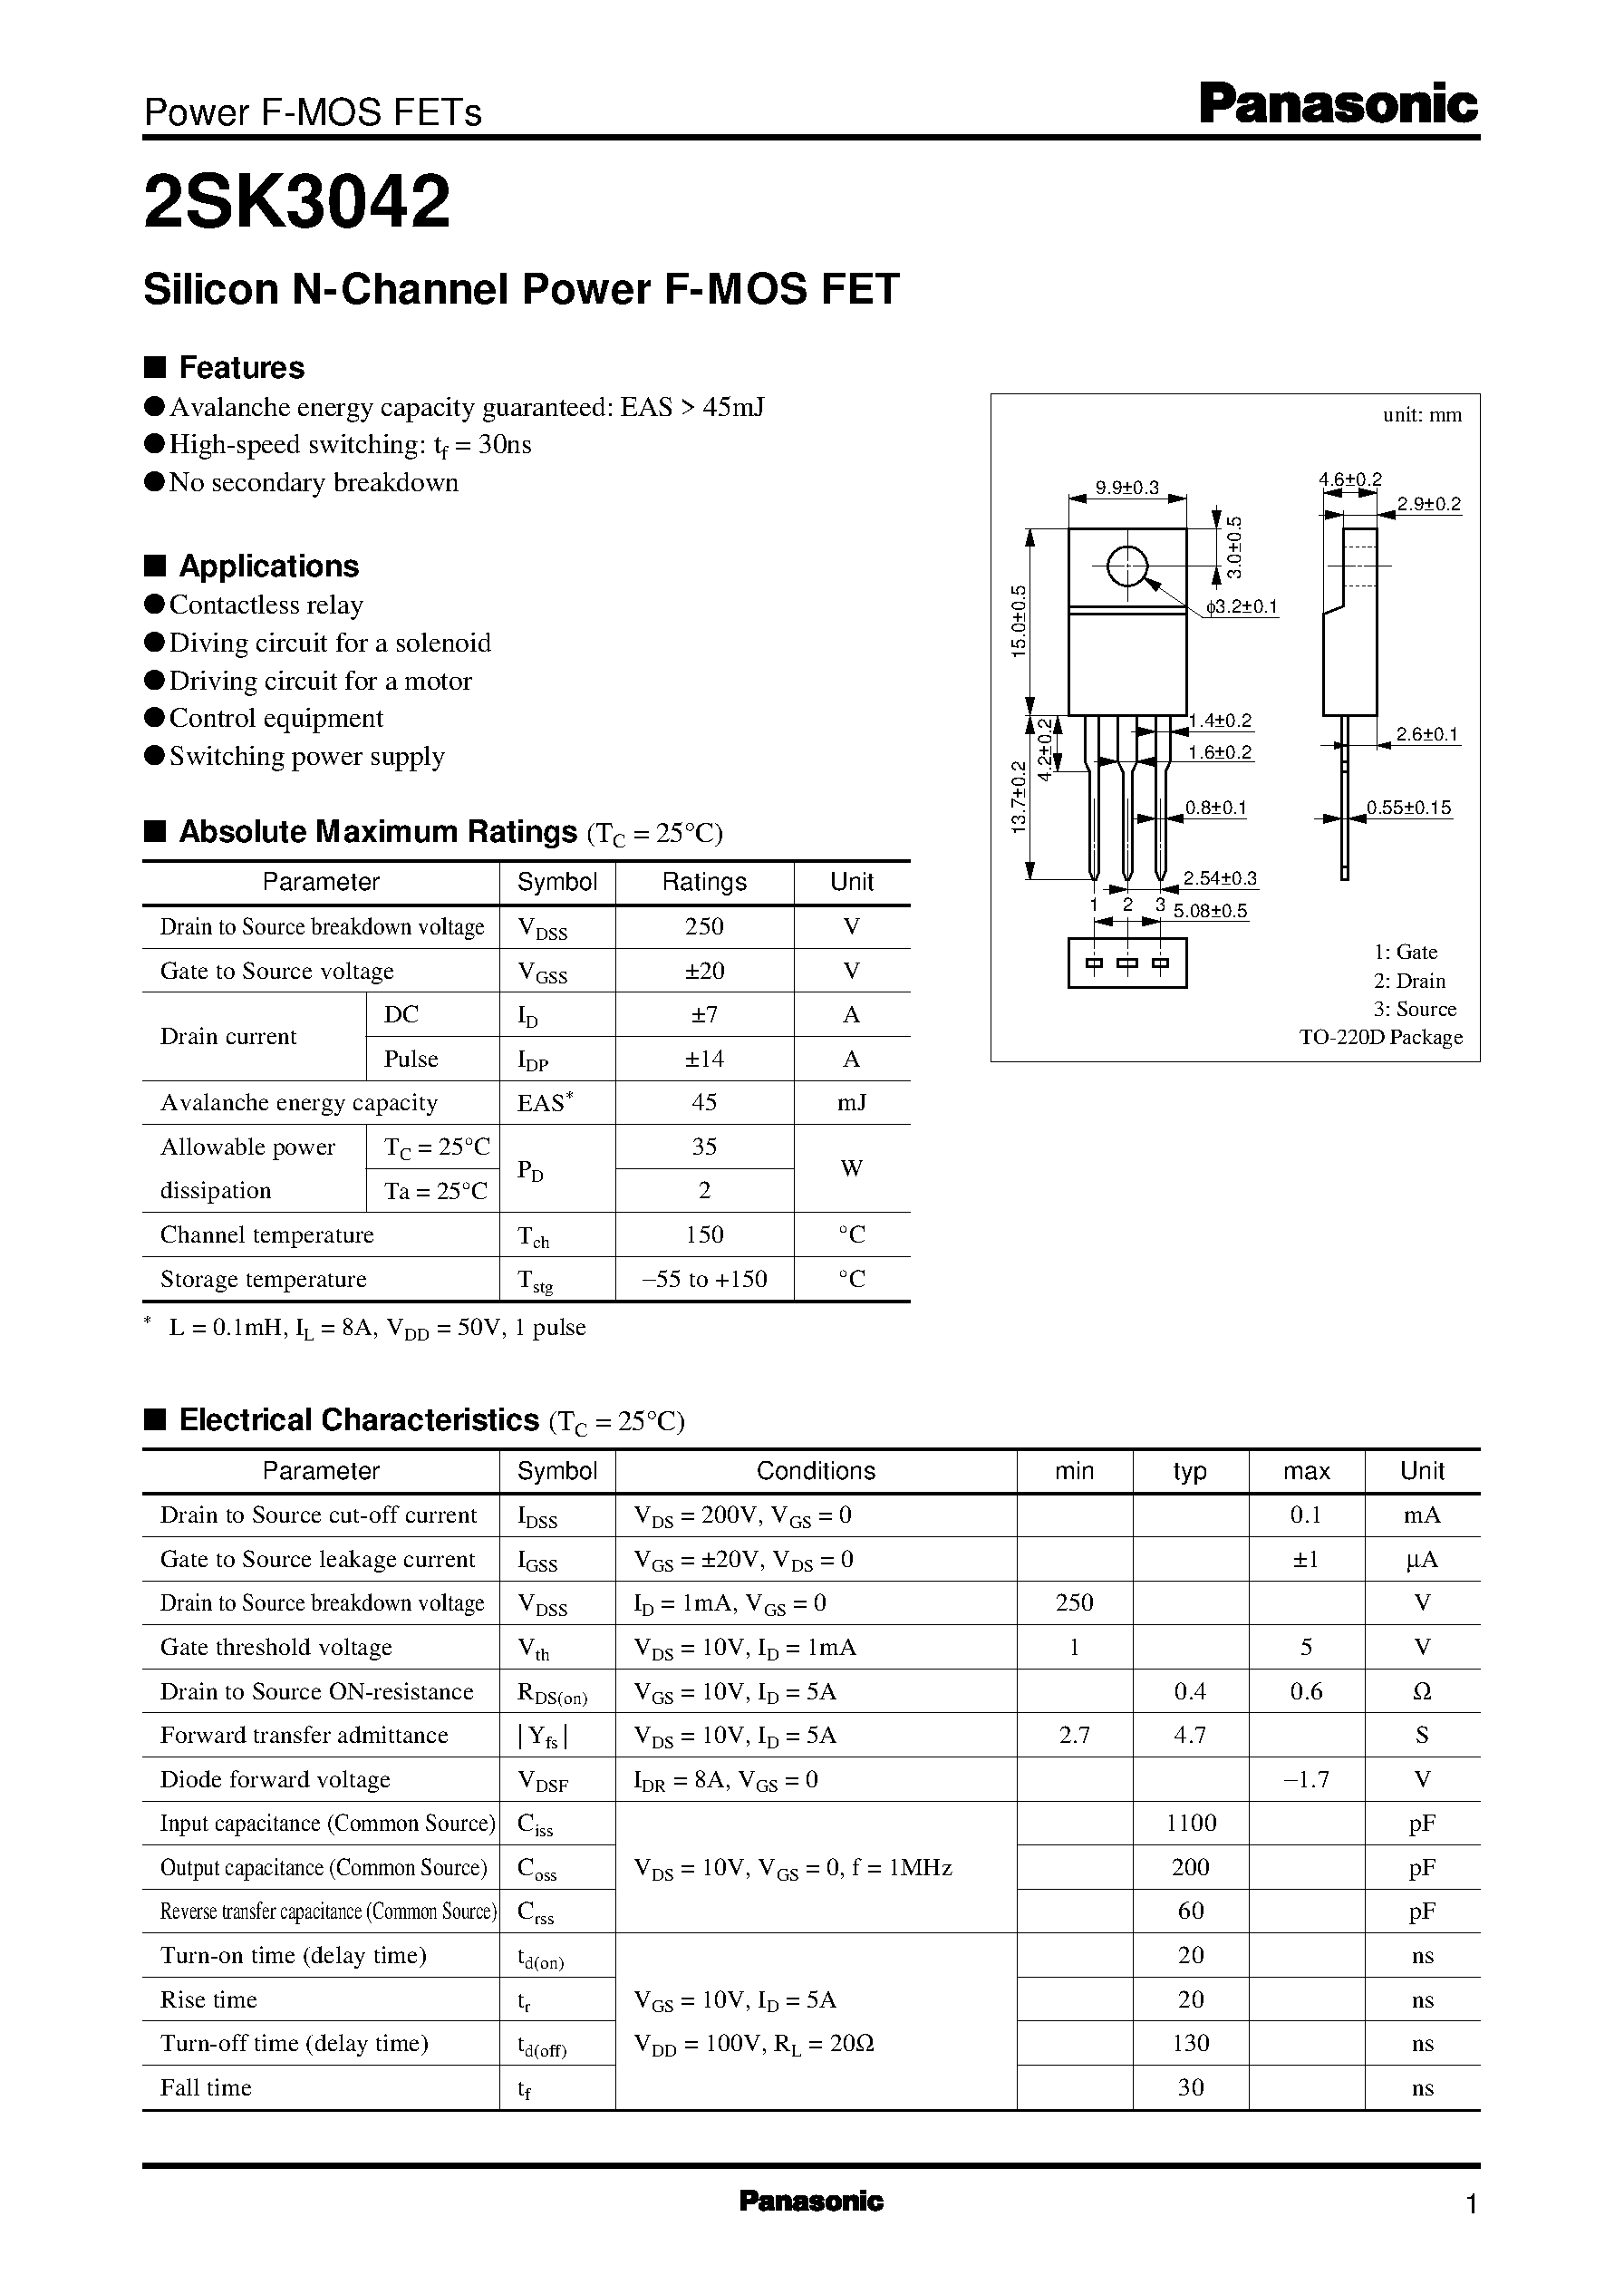 Datasheet 2SK3042 - Silicon N-Channel Power F-MOS FET page 1